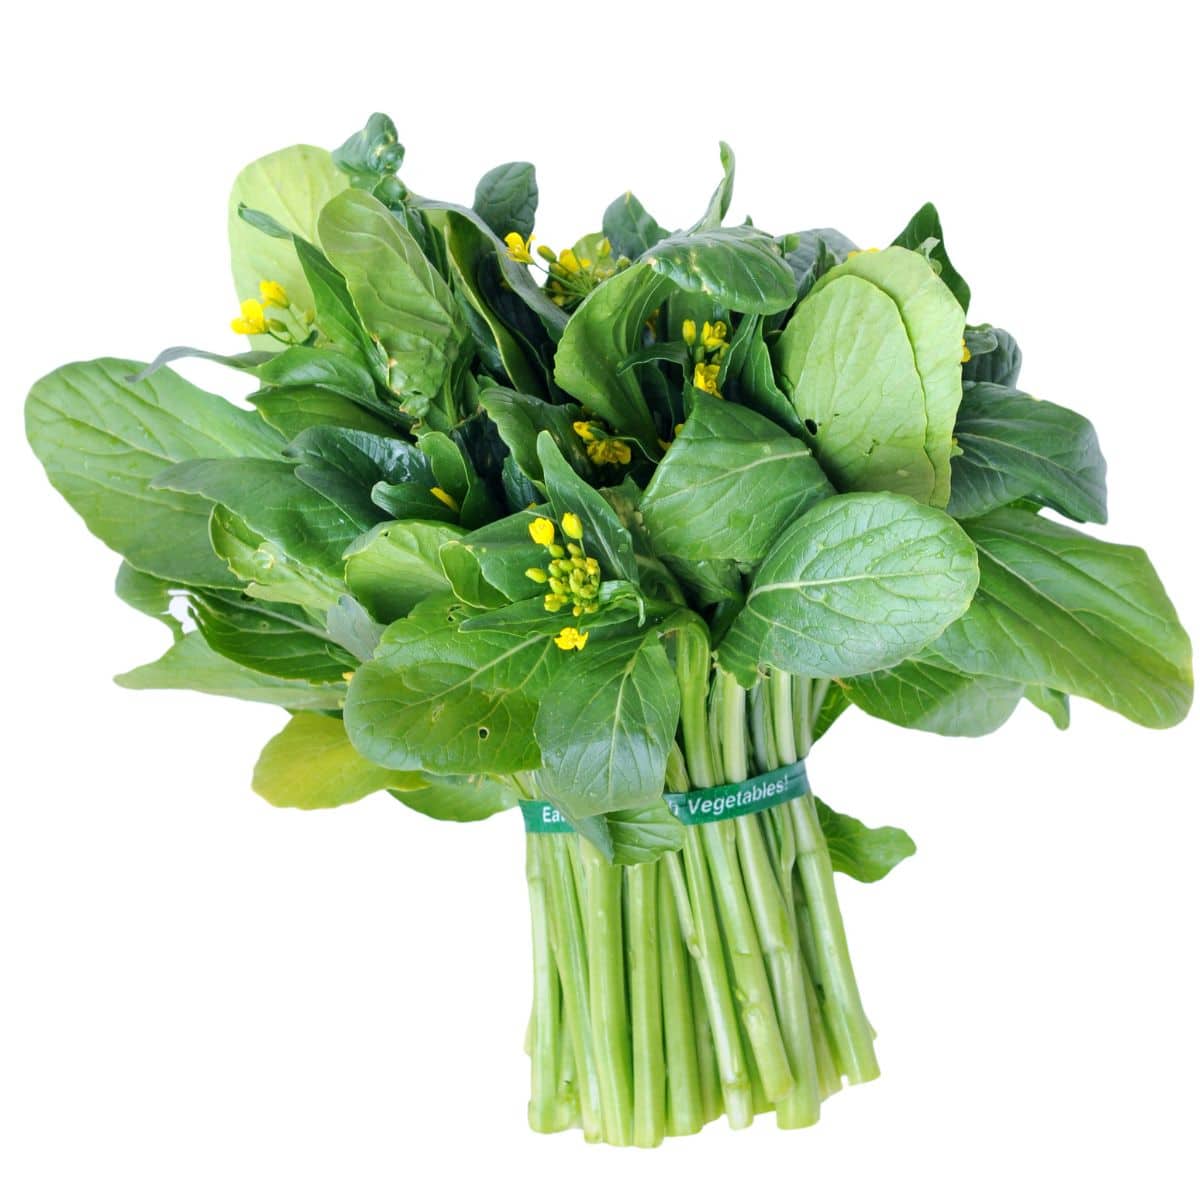 Asian spinach leaves on a white background.